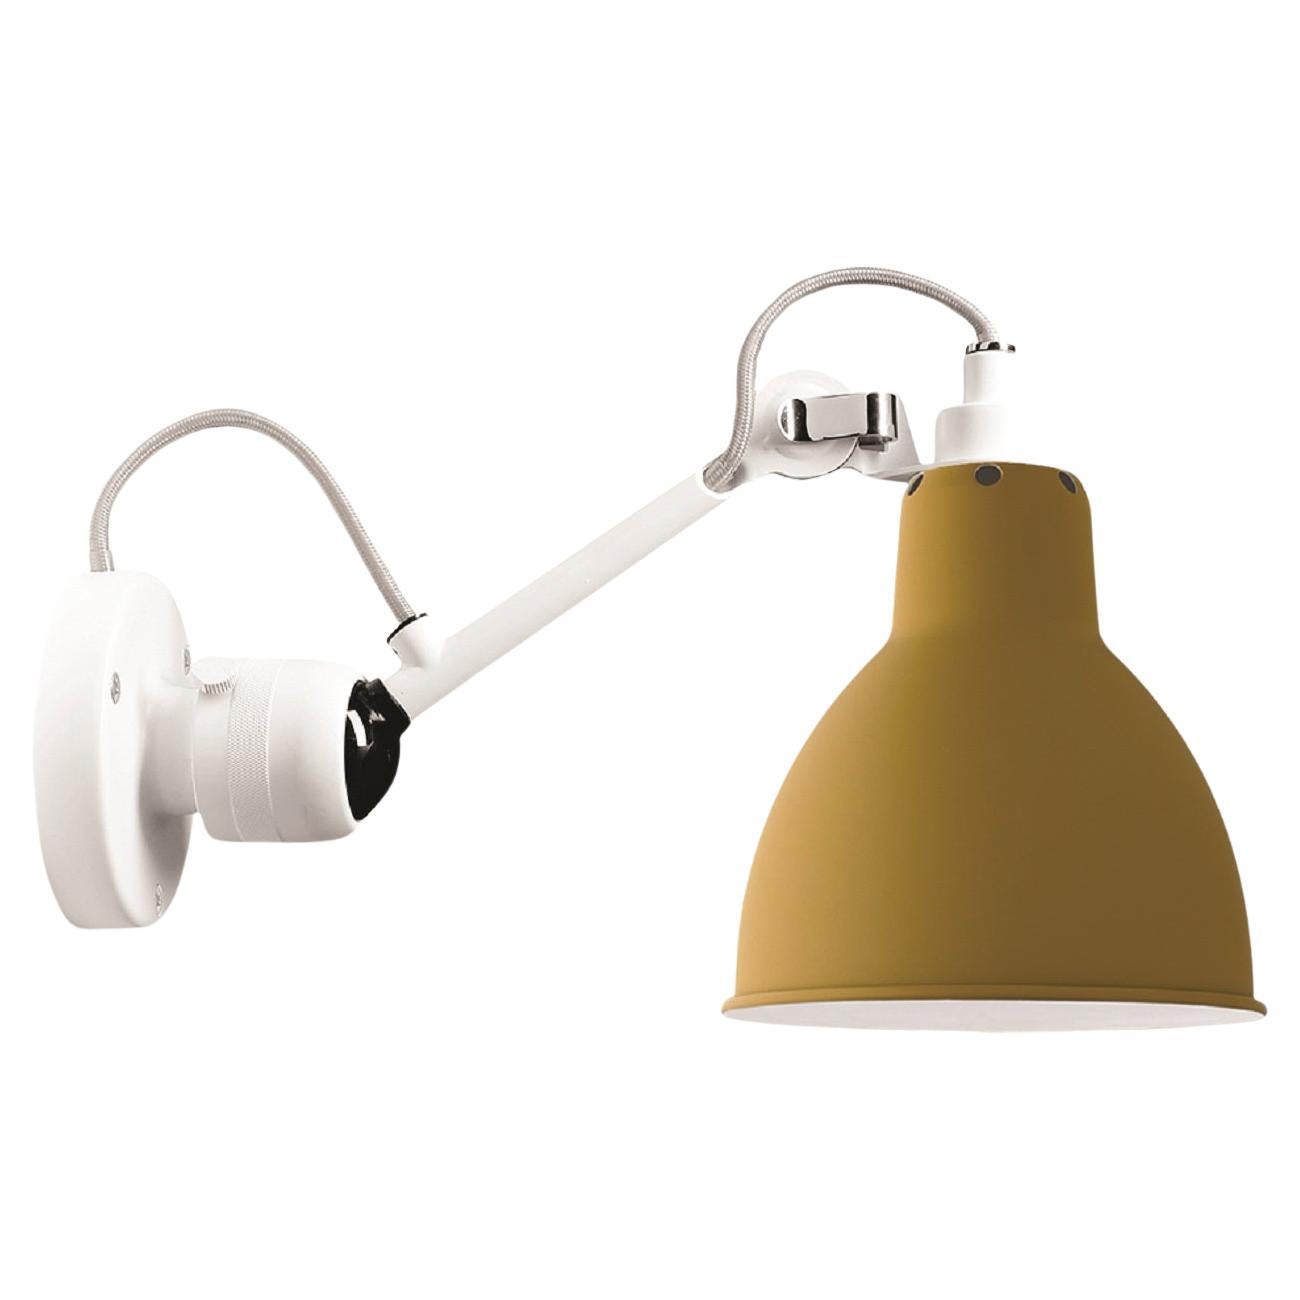 DCW Editions La Lampe Gras N°304 Wall Lamp in White Arm and Yellow Shade